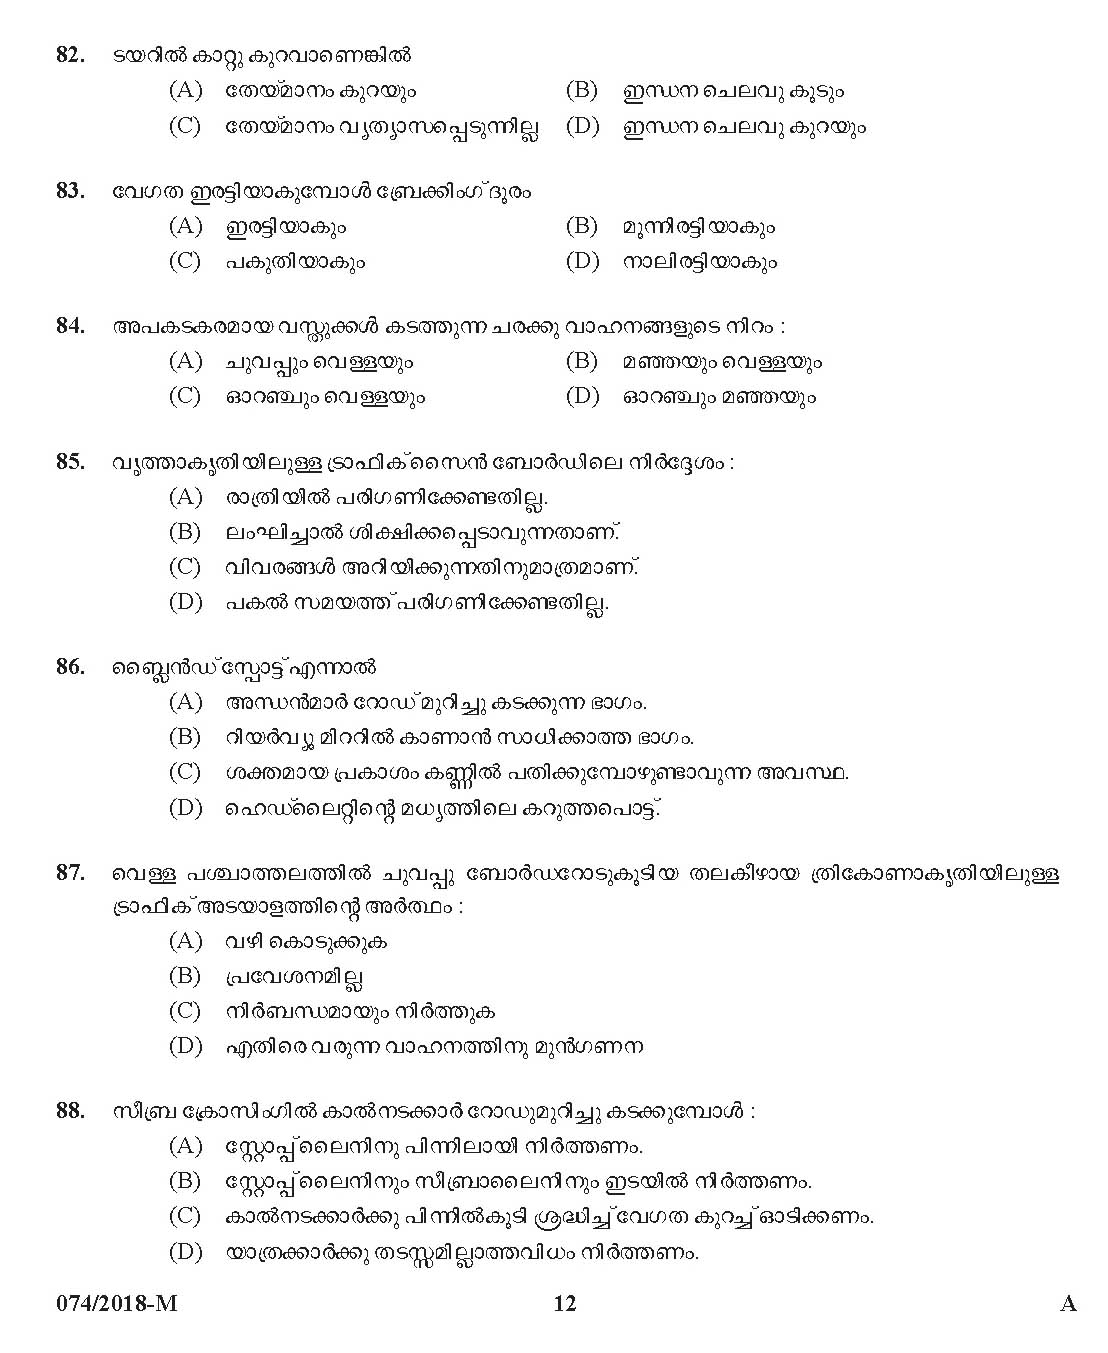 Kerala PSC Police Constable Driver Exam 2018 Question Paper Code 0742018 M 11